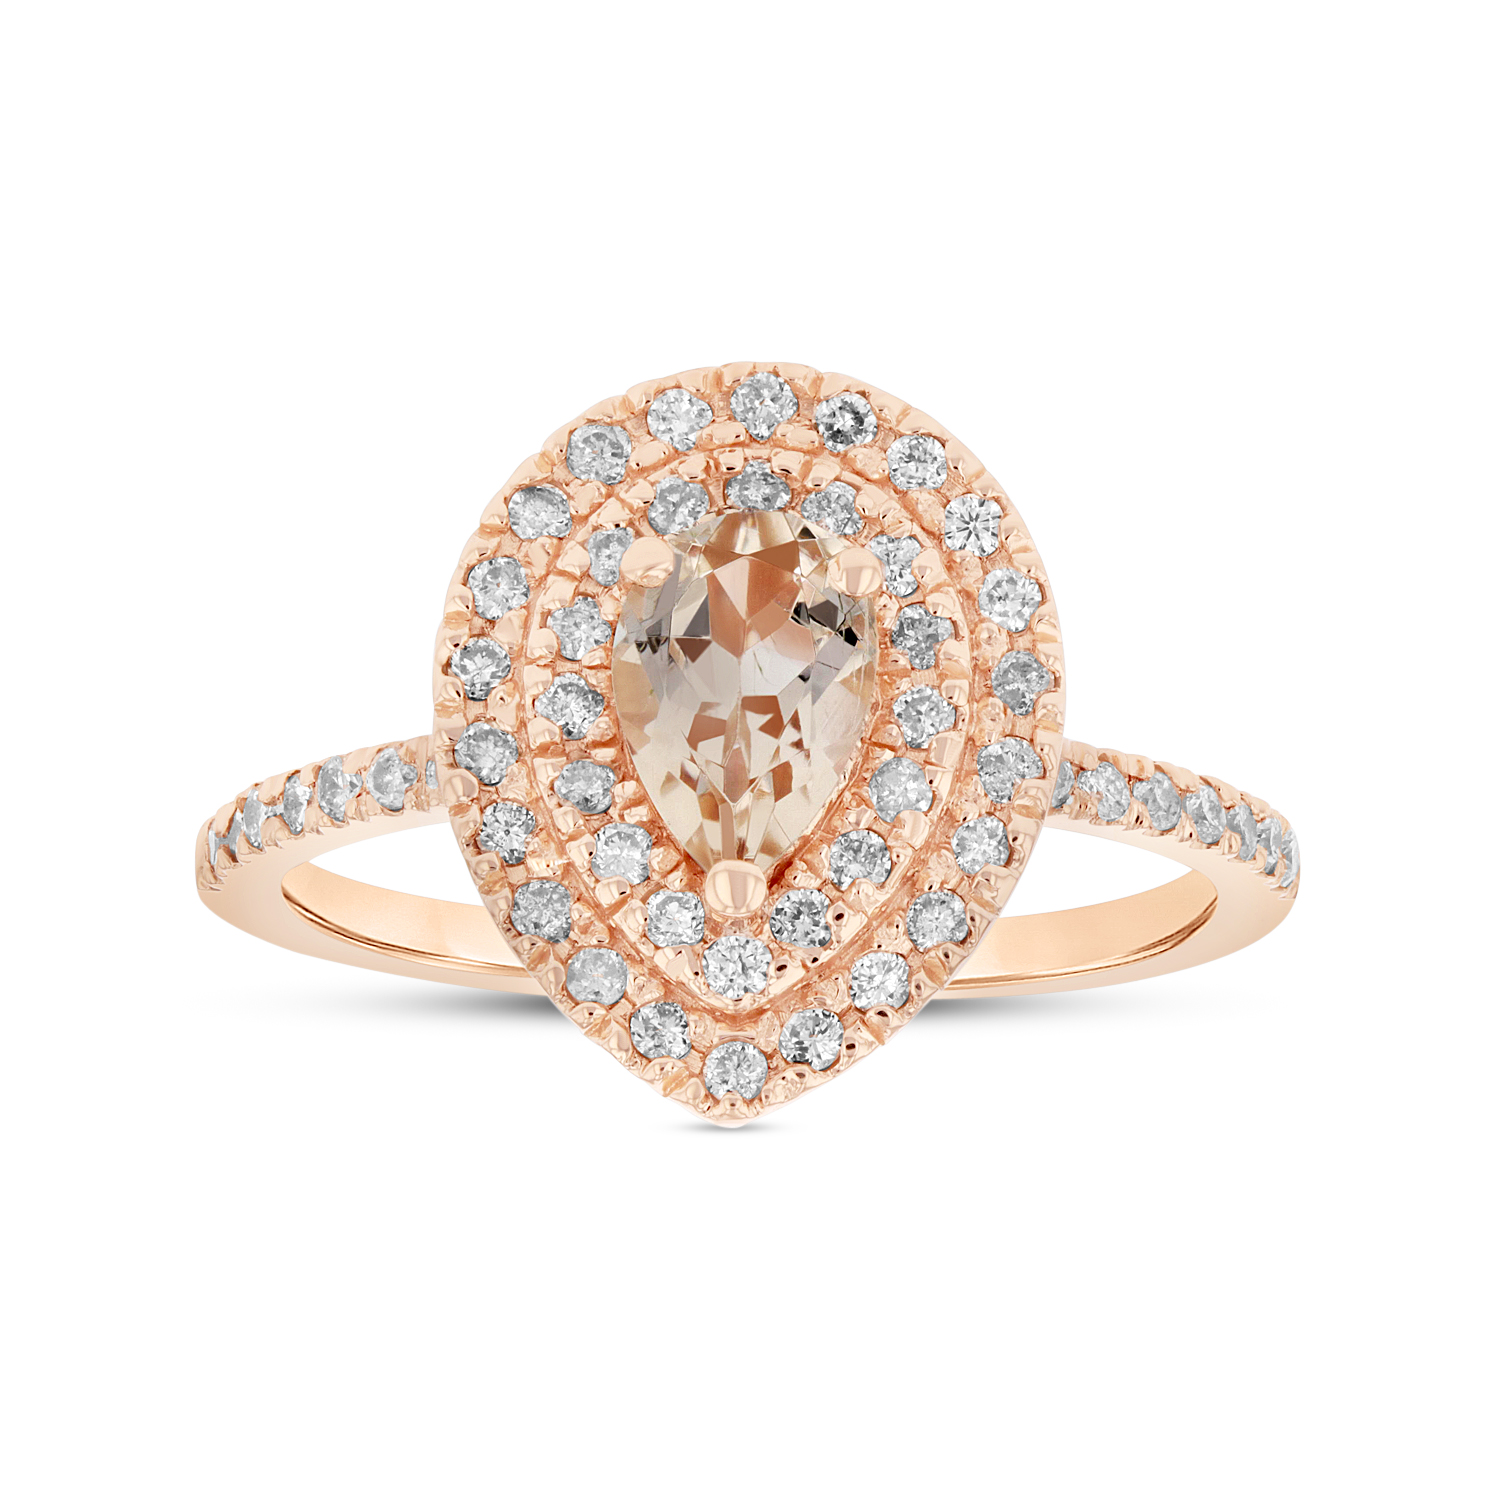 View 7X5 mm Pear Shape Morganite and Diamond Ring in 14k Rose Gold Double Row Halo